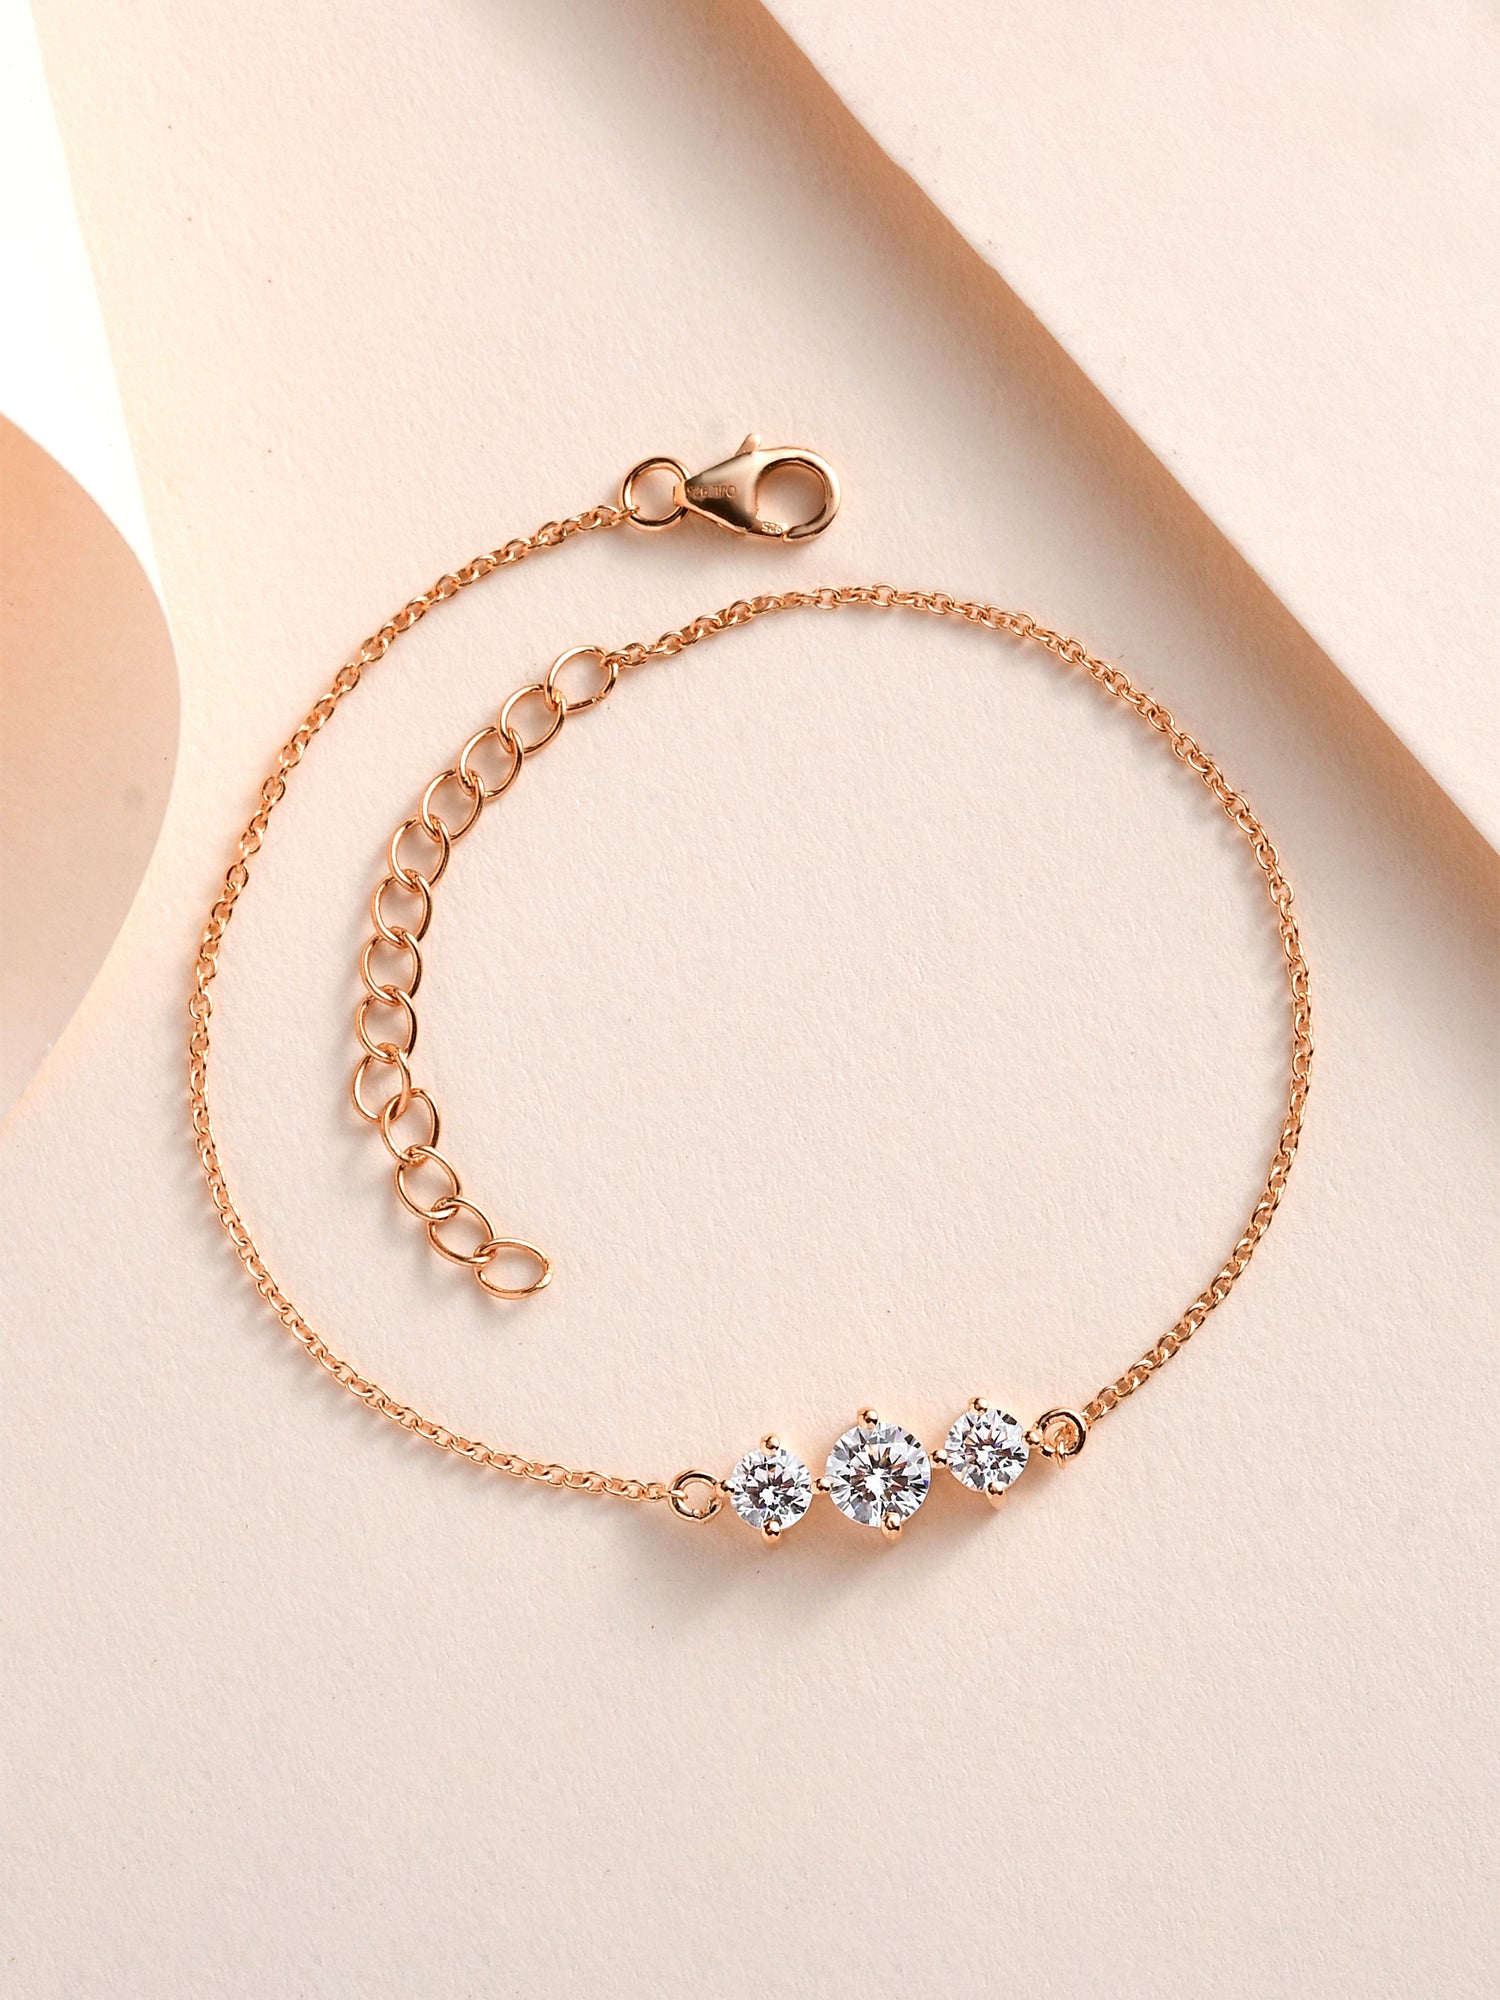 Three Solitaire American Diamond Rose Gold Plated Silver Bracelet